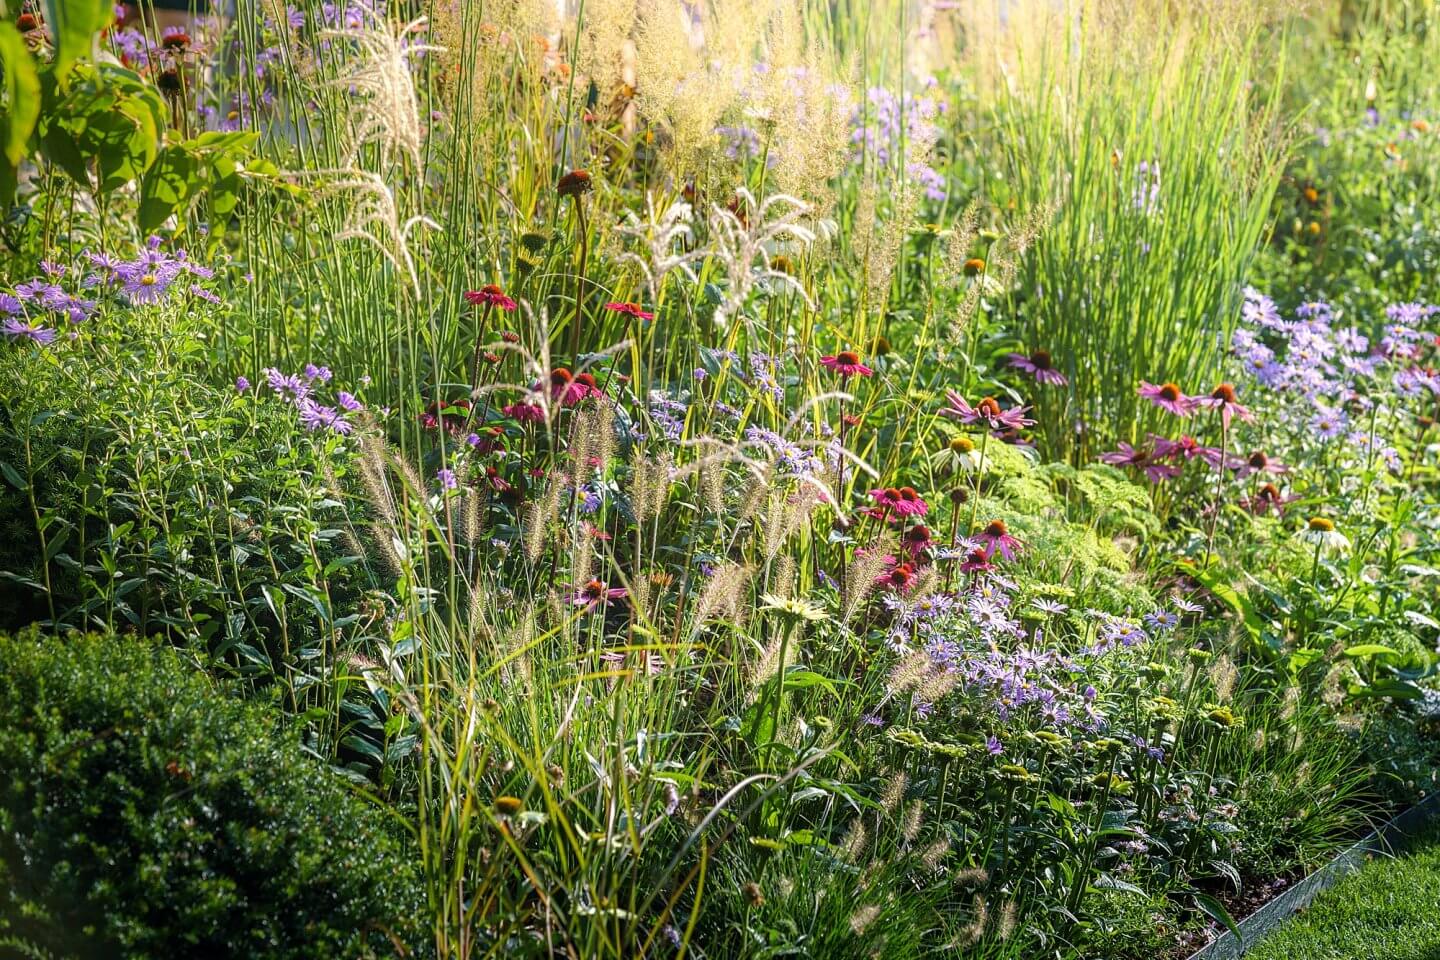 florence nightingale nursing garden with naturalistic planting and autumnal grasses